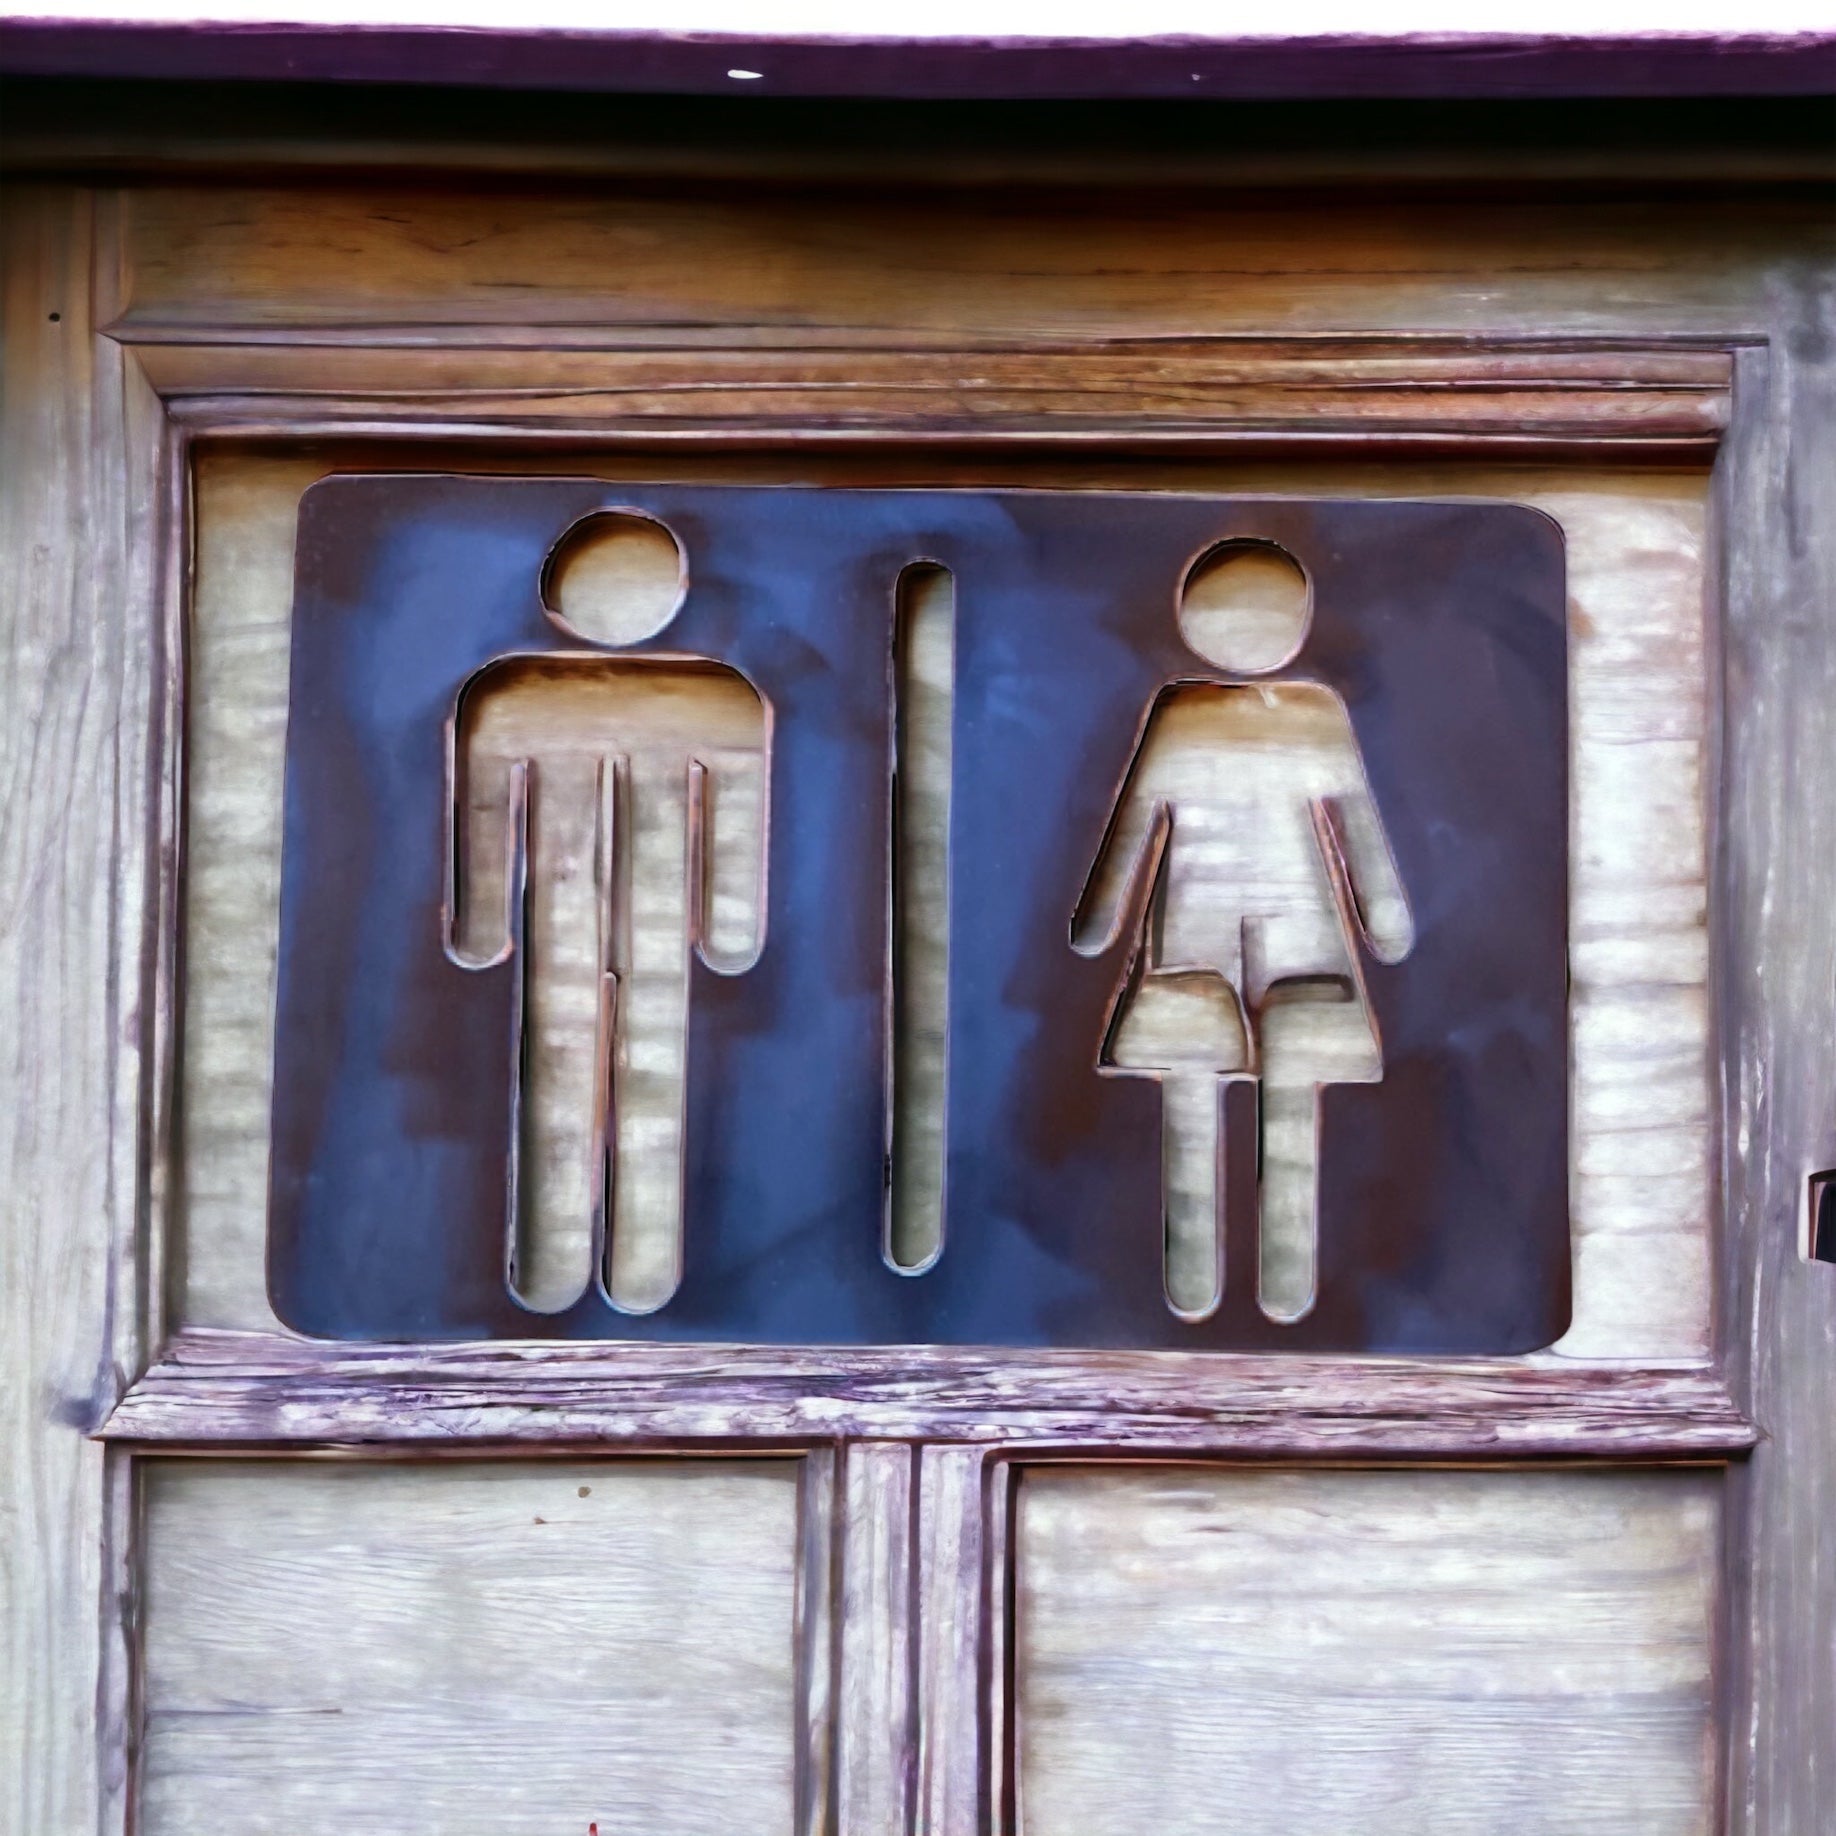 Toilet Male Female Steel Metal Sign - The Renmy Store Homewares & Gifts 